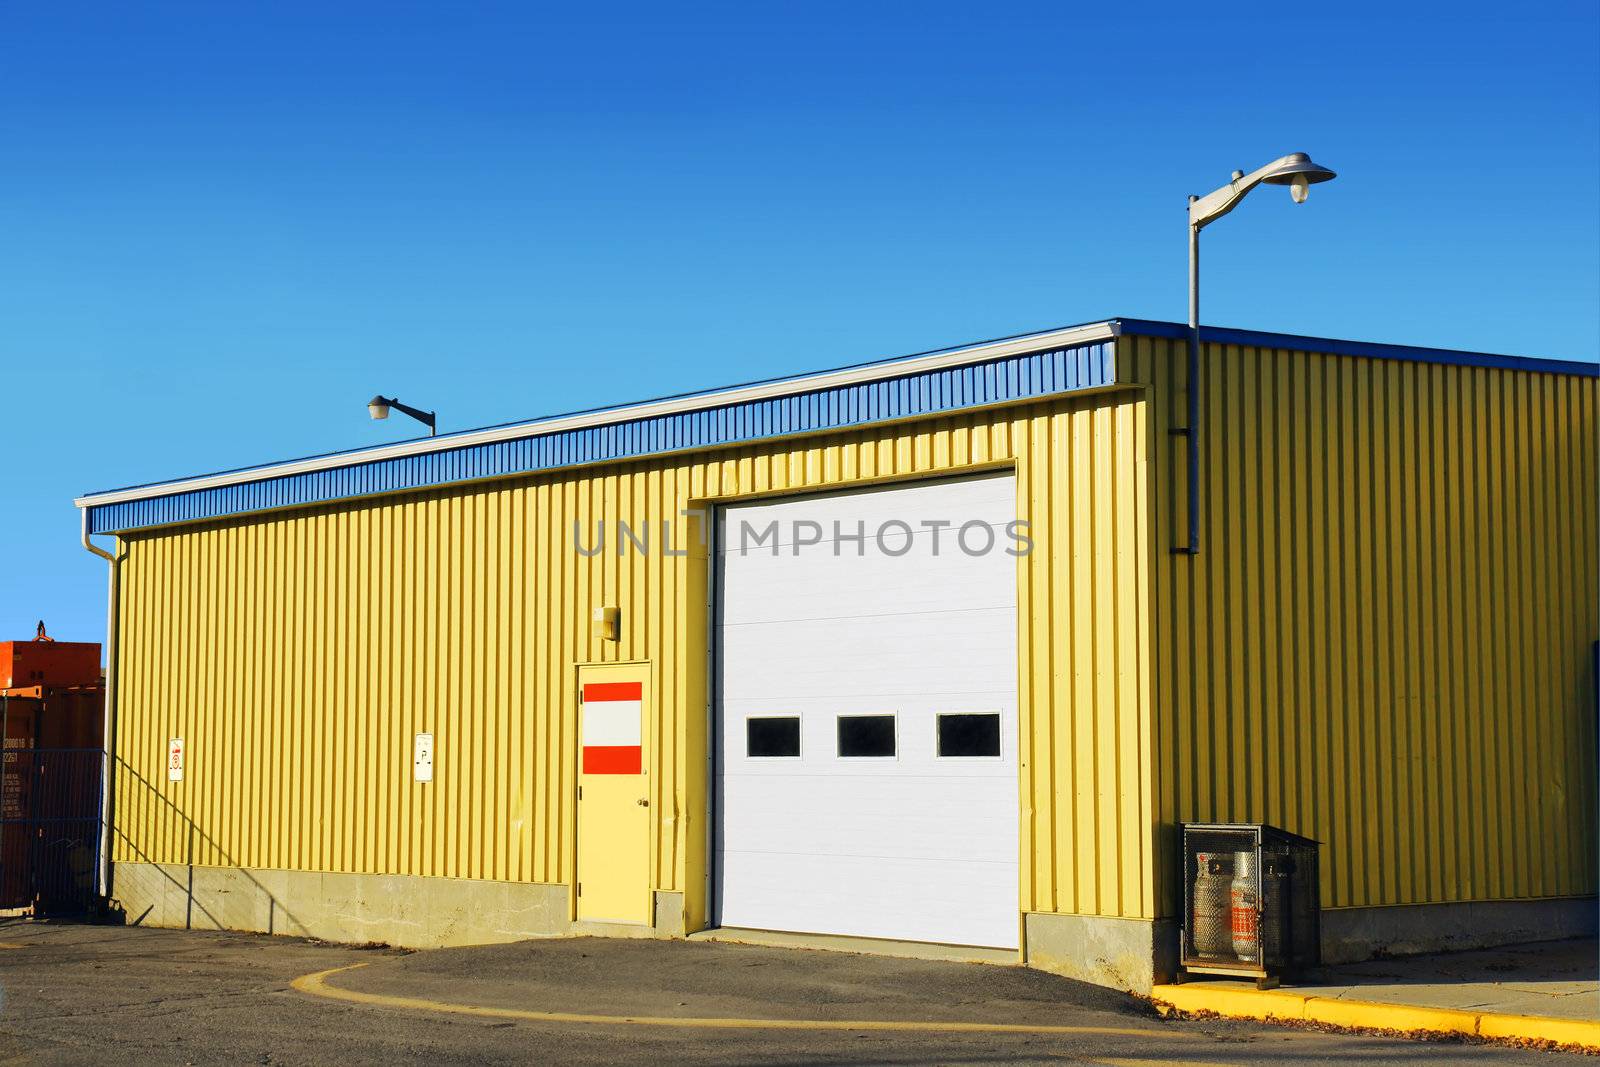 Industrial looking small garage covered with corrugated metal siding, with propane containers on one side and stored crates behind a fence on the other.